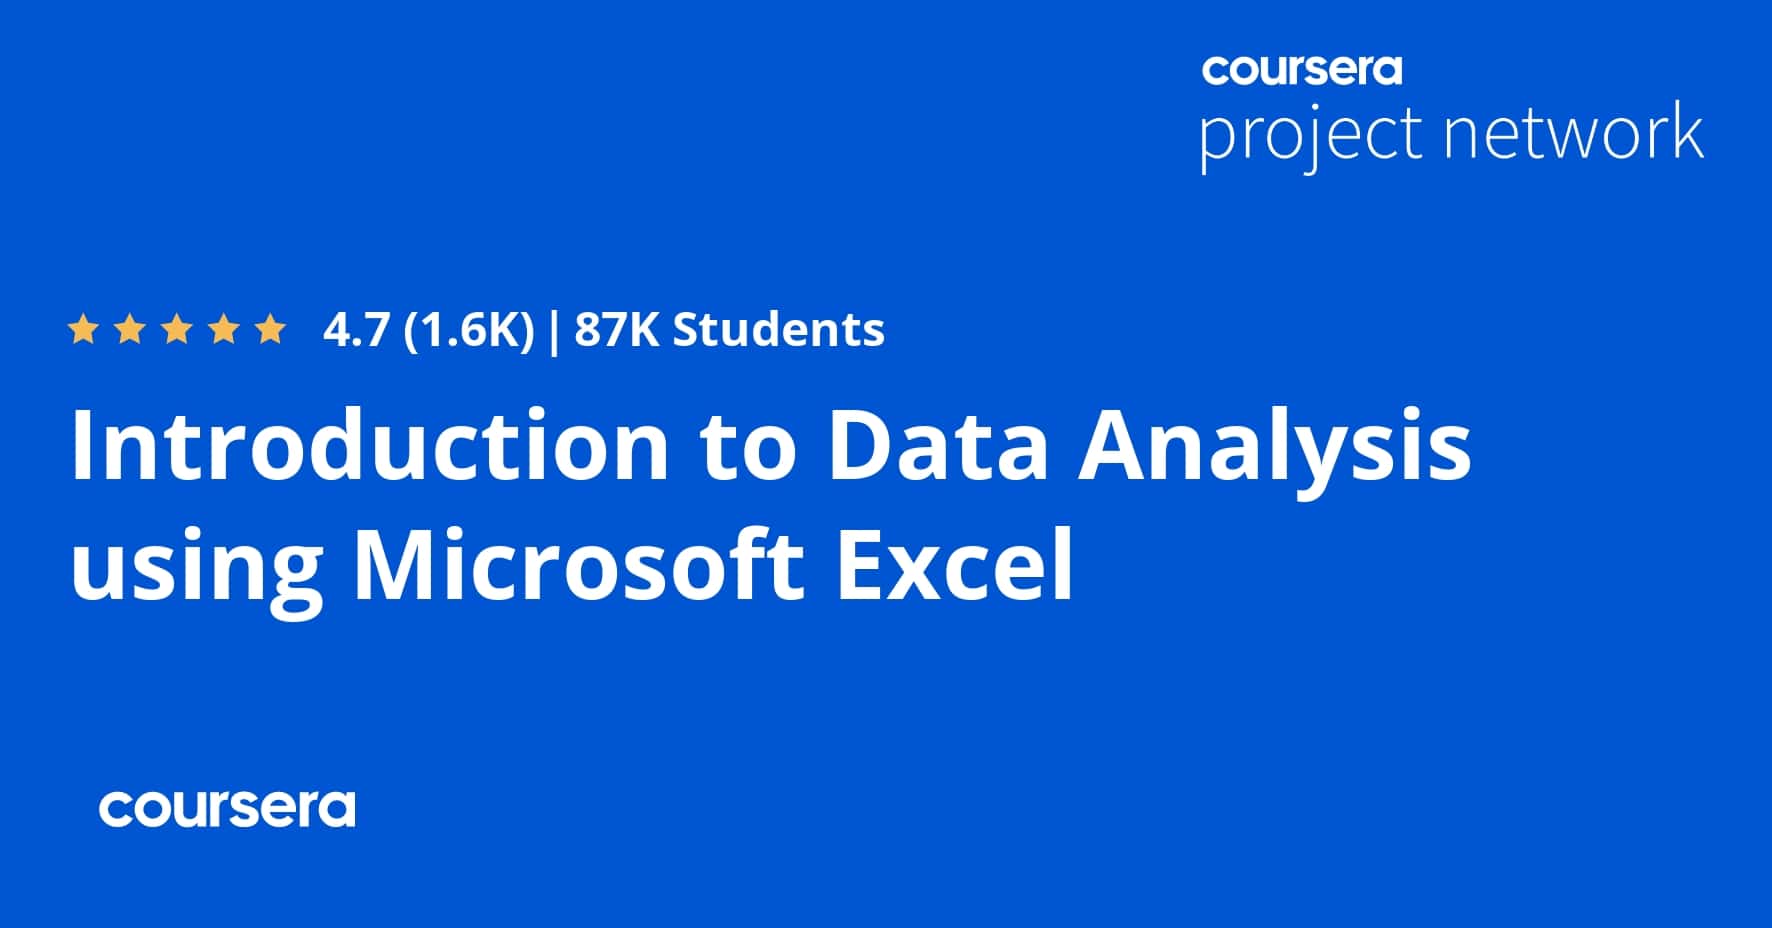 Introduction to Data Analysis using Microsoft Excel